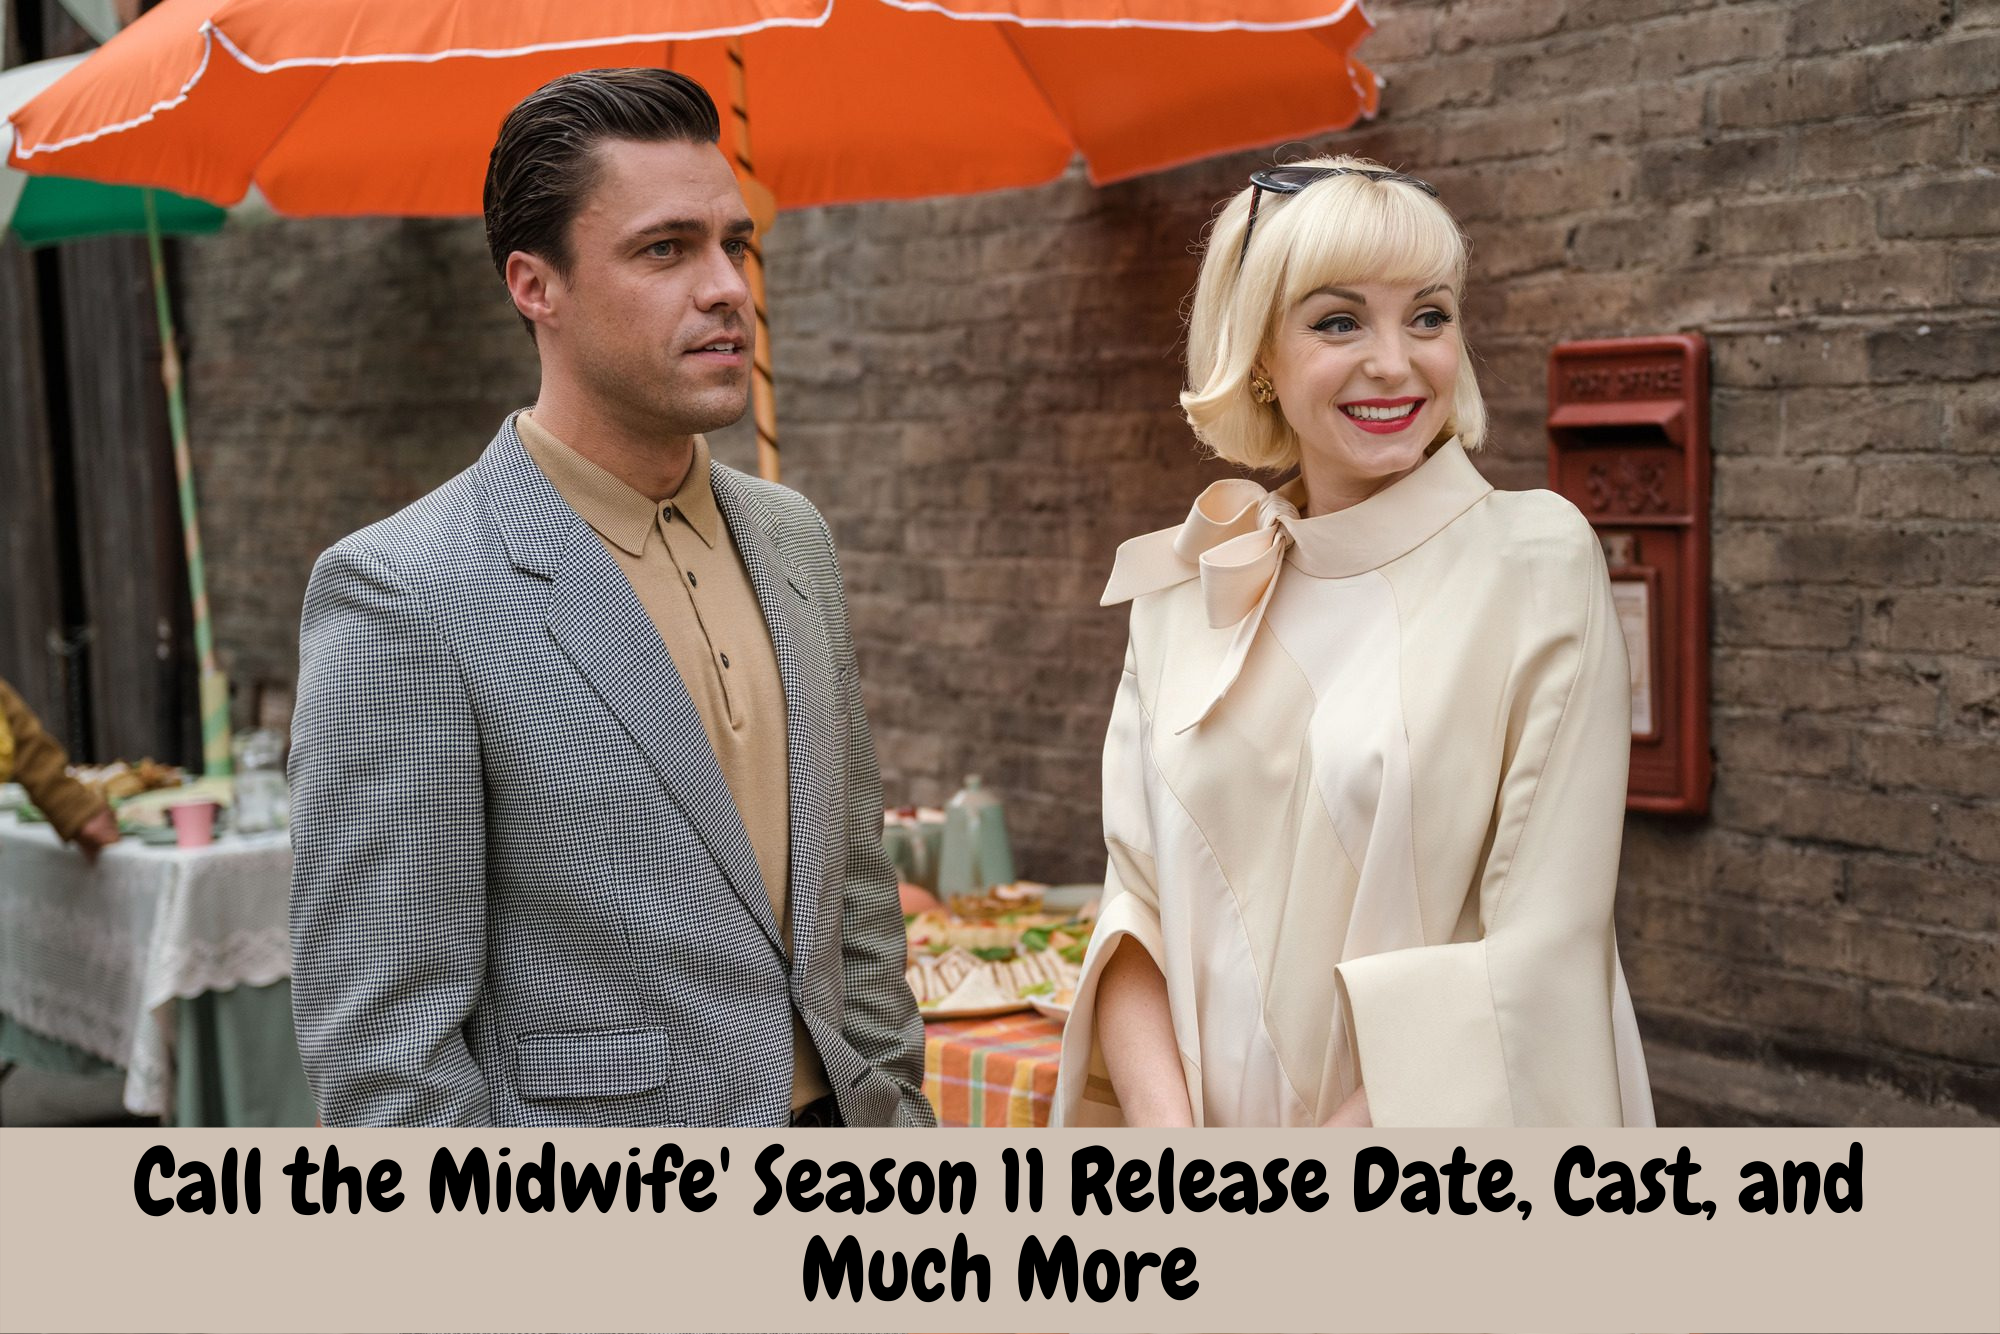 Call the Midwife' Season 11 Release Date, Cast, and Much More